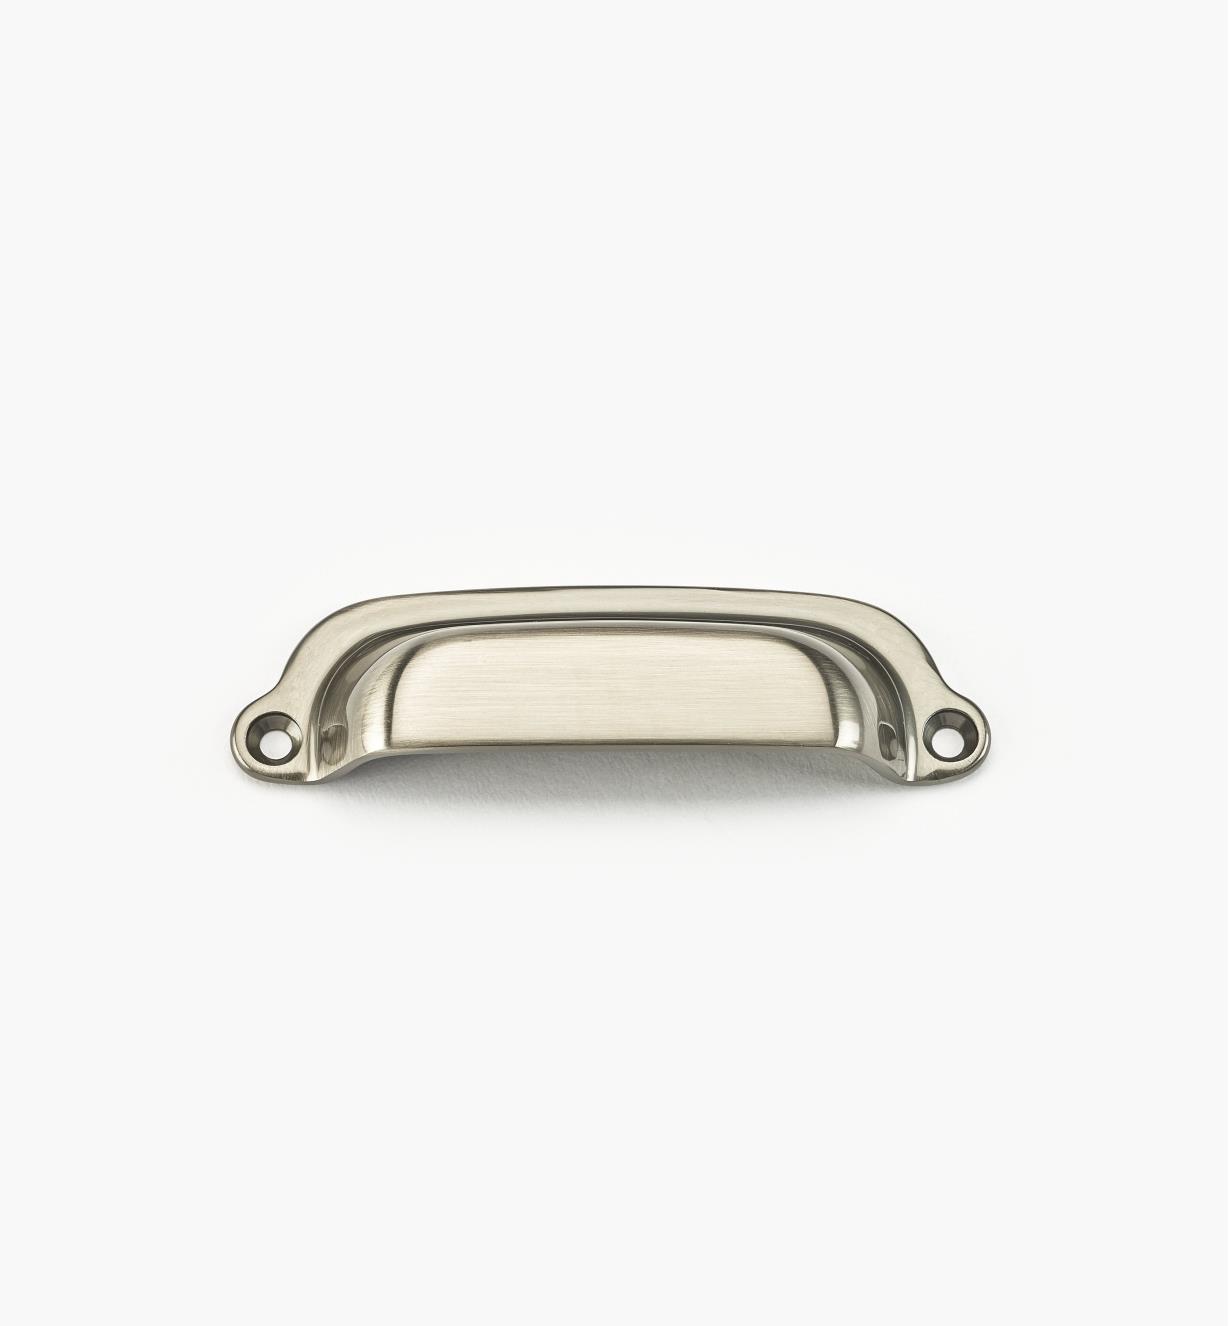 02W1649 - Antique Nickel Suite - 86mm Forged Brass Pull